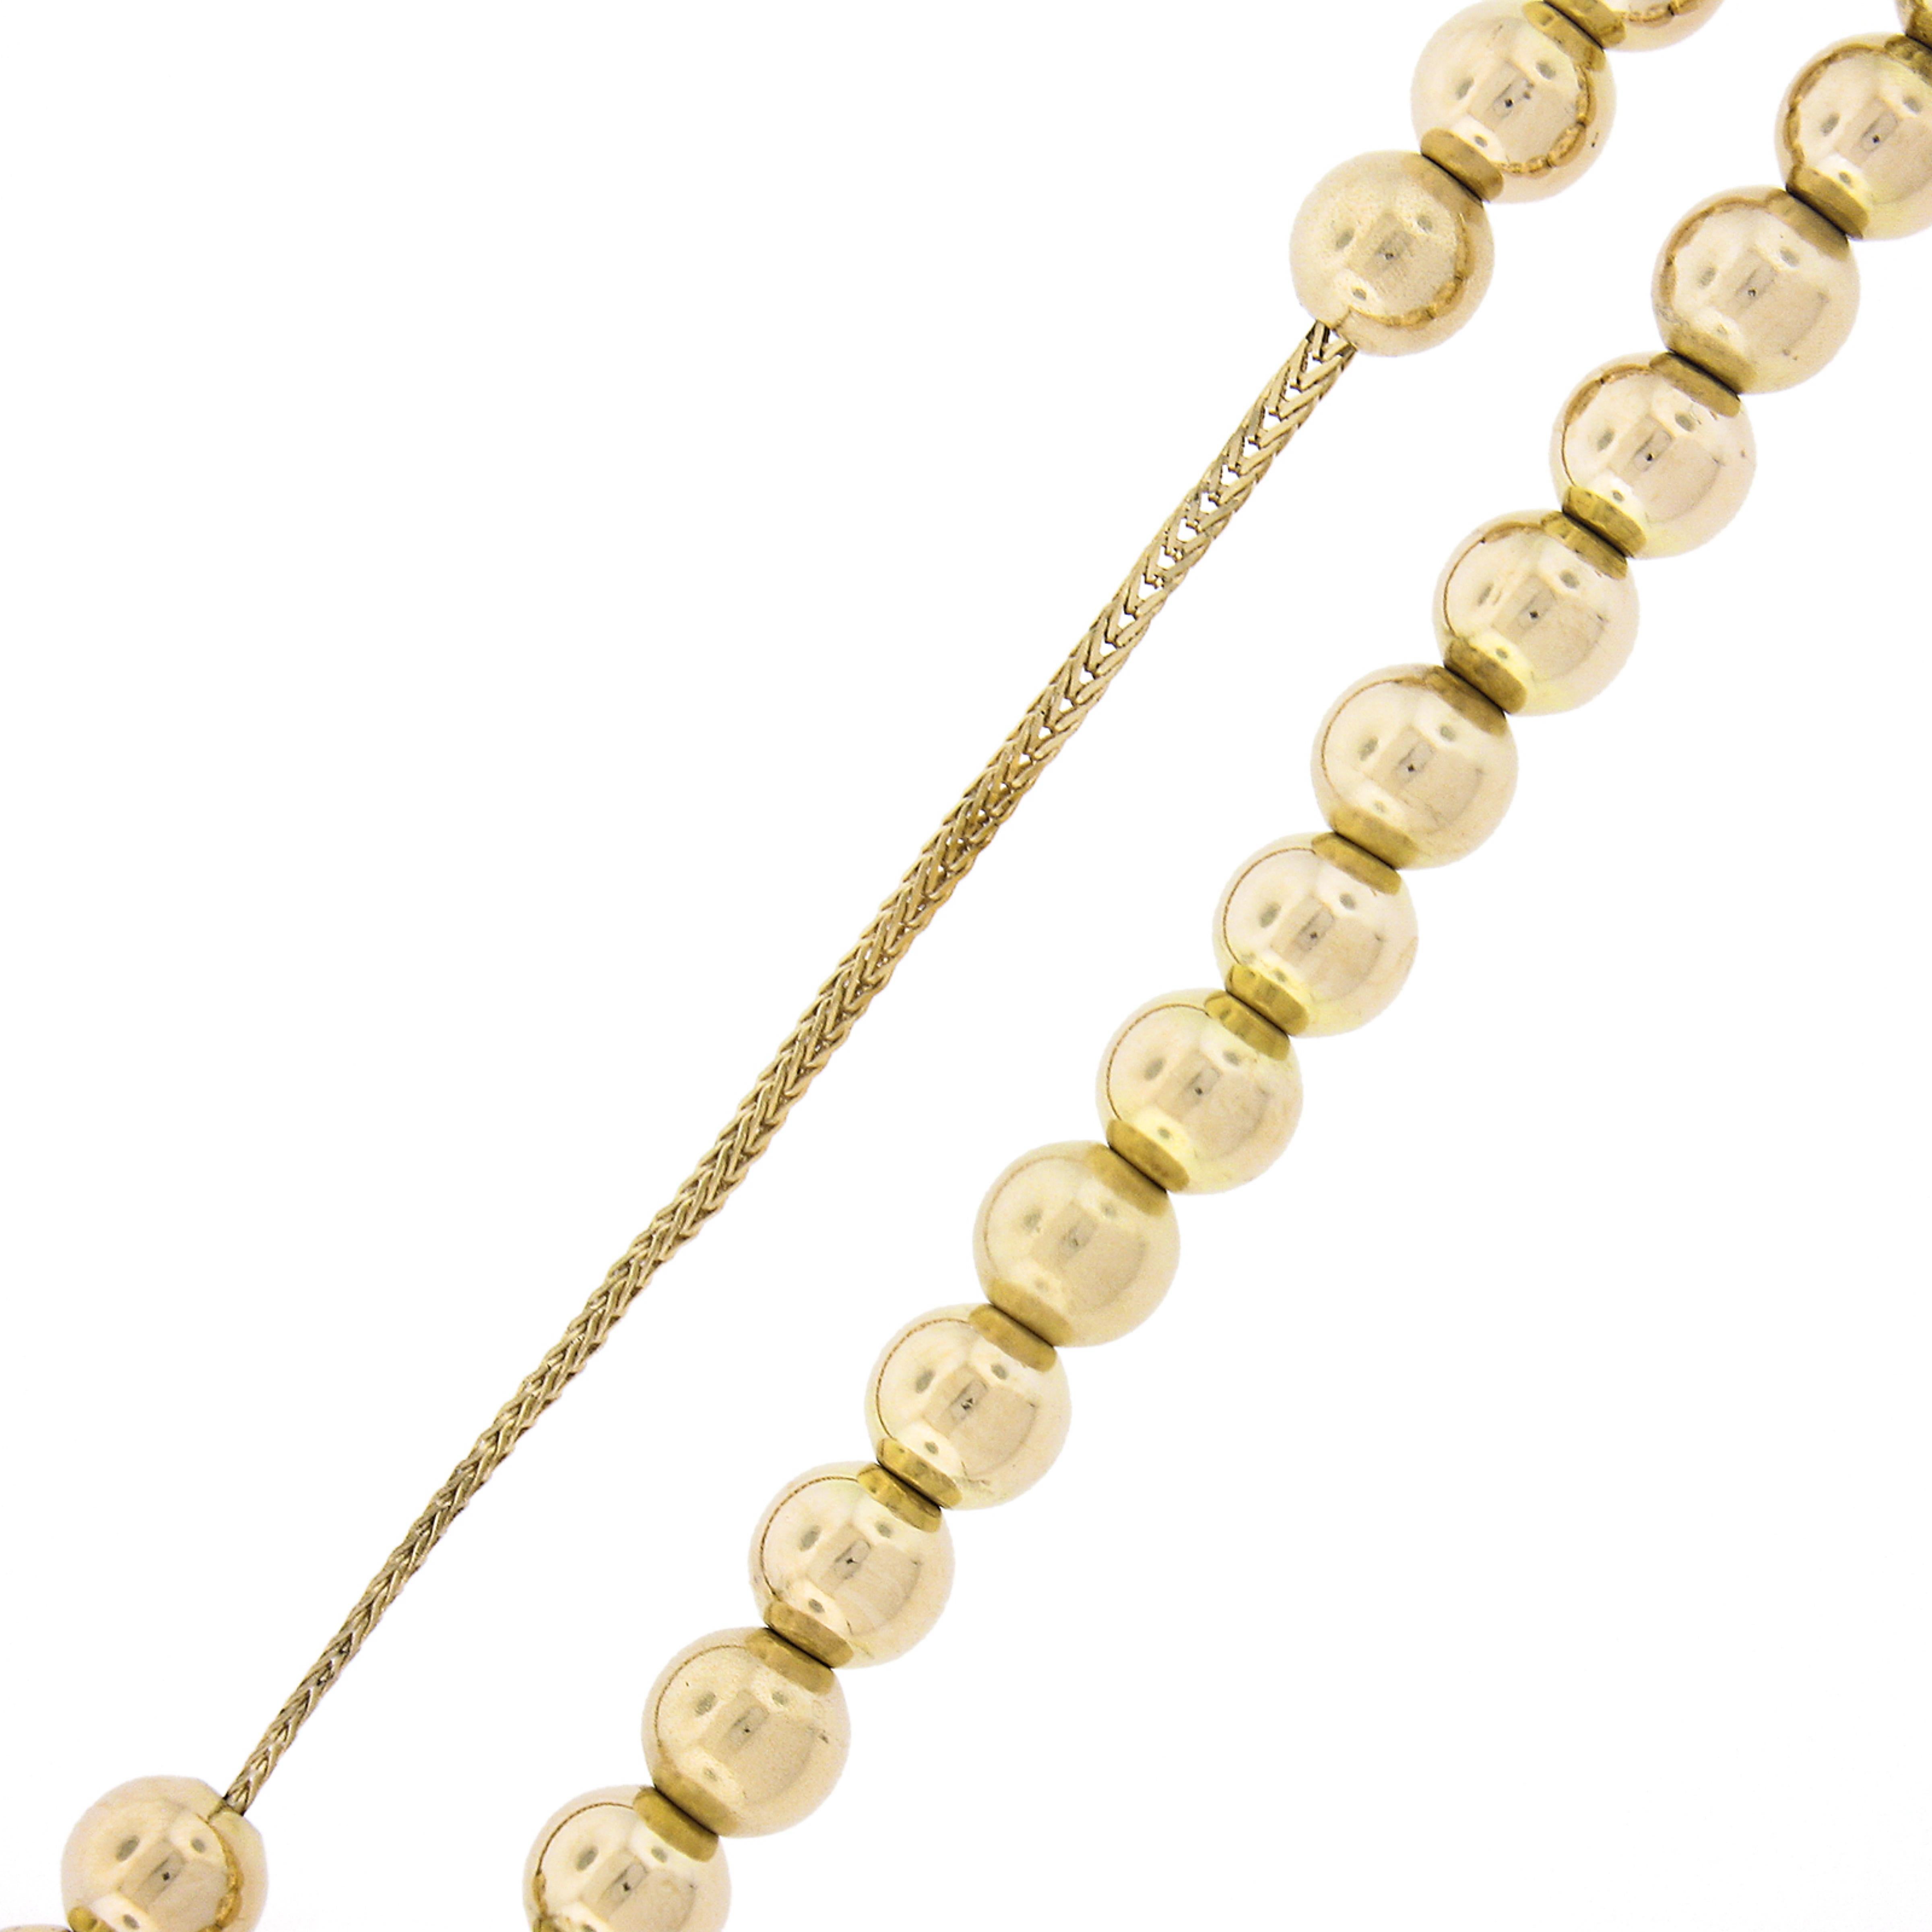 Vintage Italian 14k Gold Round Bead Ball on Wheat Link Chain Necklace In Excellent Condition For Sale In Montclair, NJ